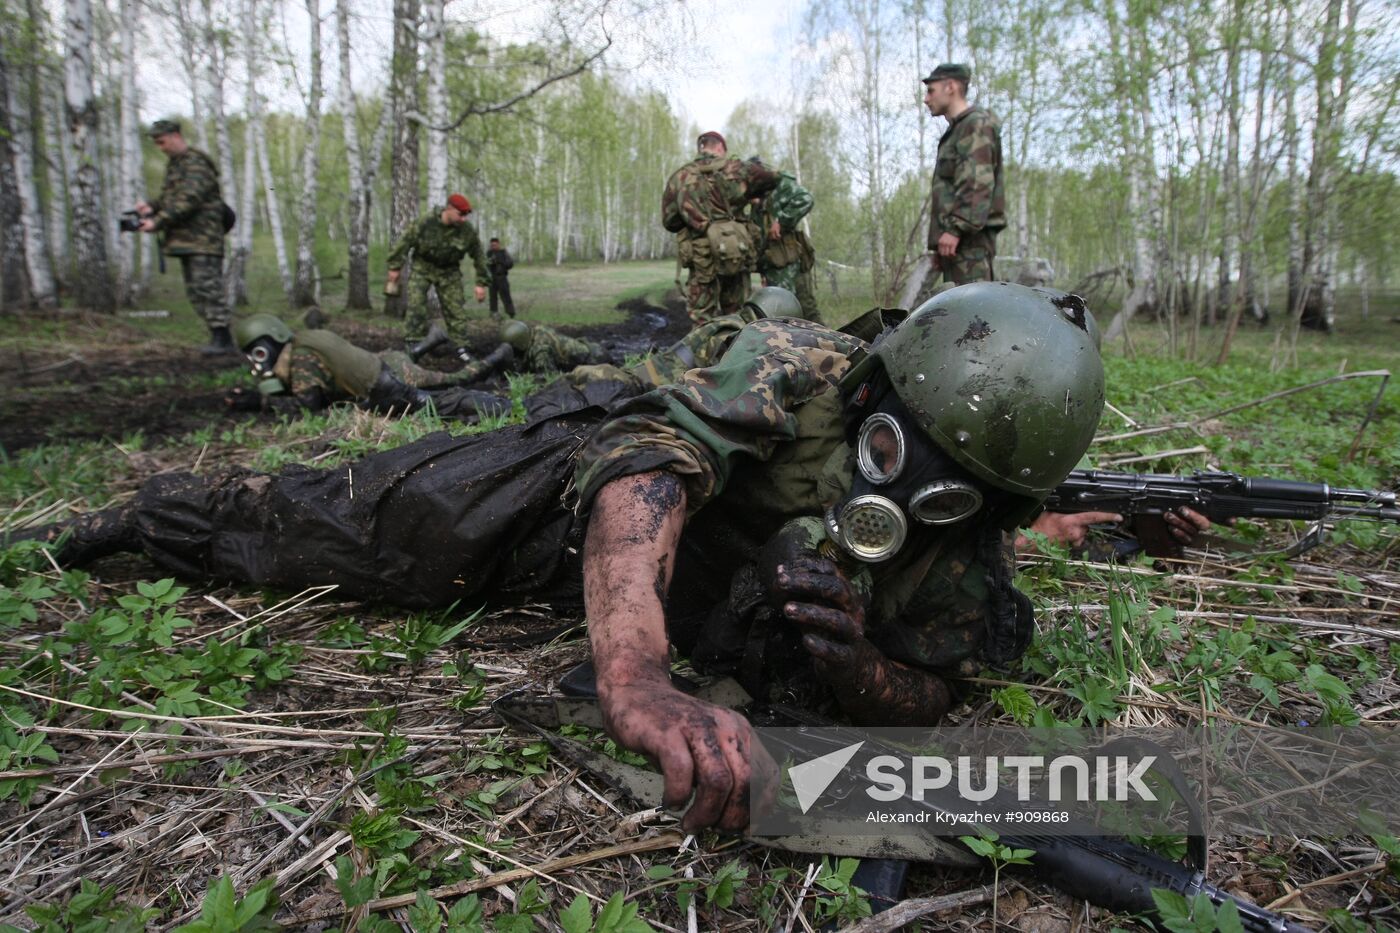 Special forces taking preliminary red beret qualification exam